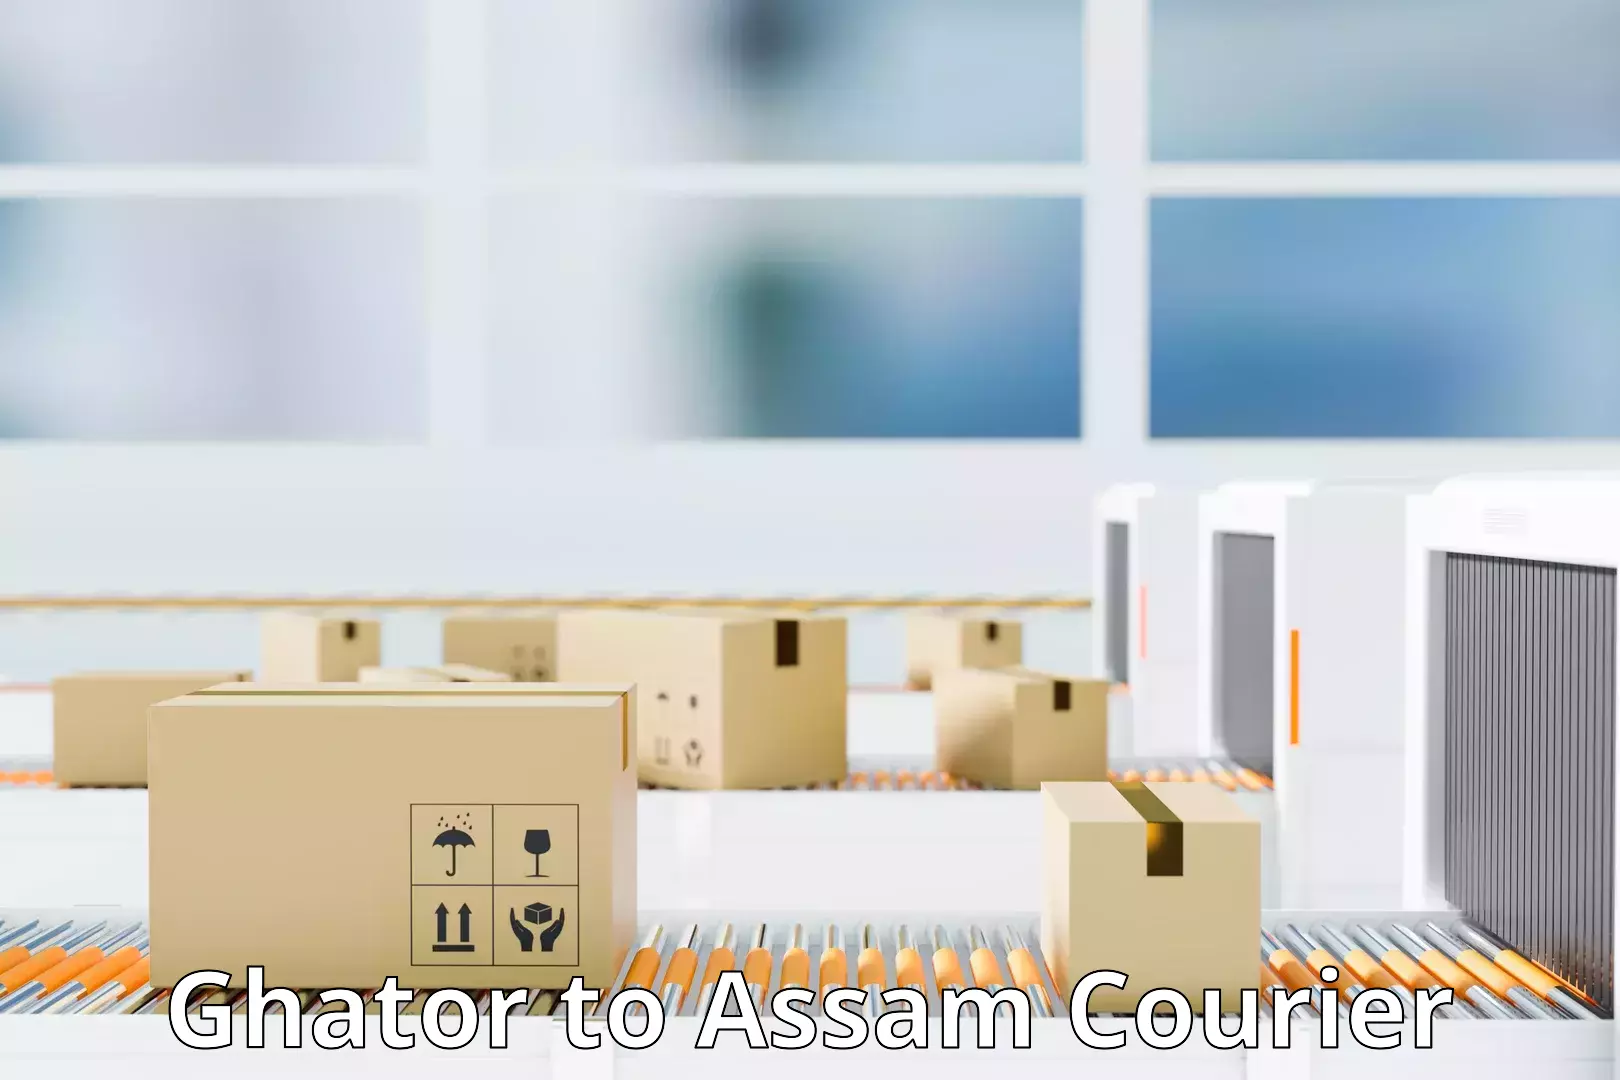 Efficient package consolidation Ghator to Assam